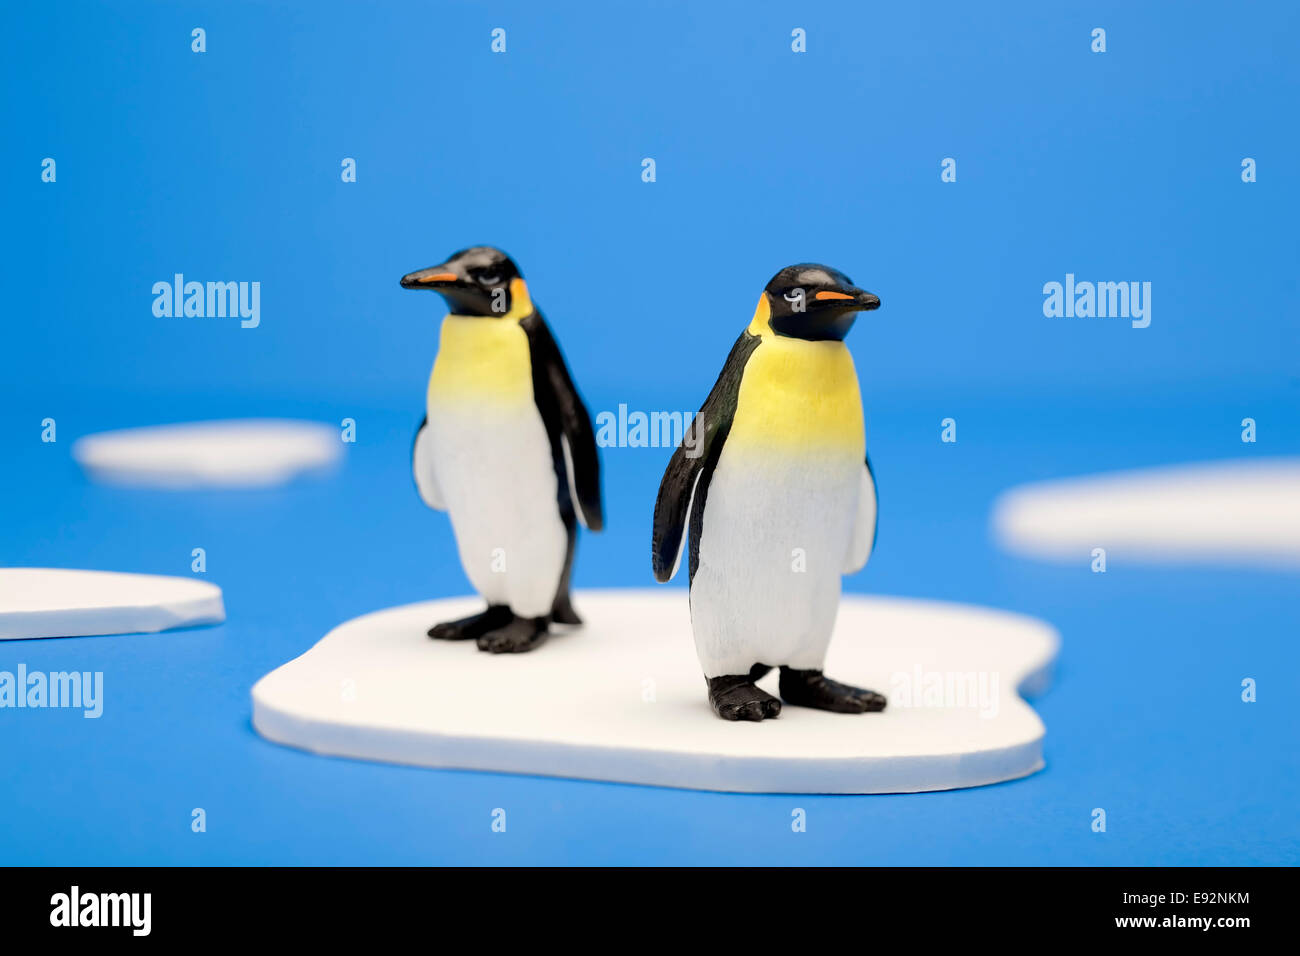 A conceptual illustration showing two penguins standing on a small piece of ice in the arctic. Stock Photo